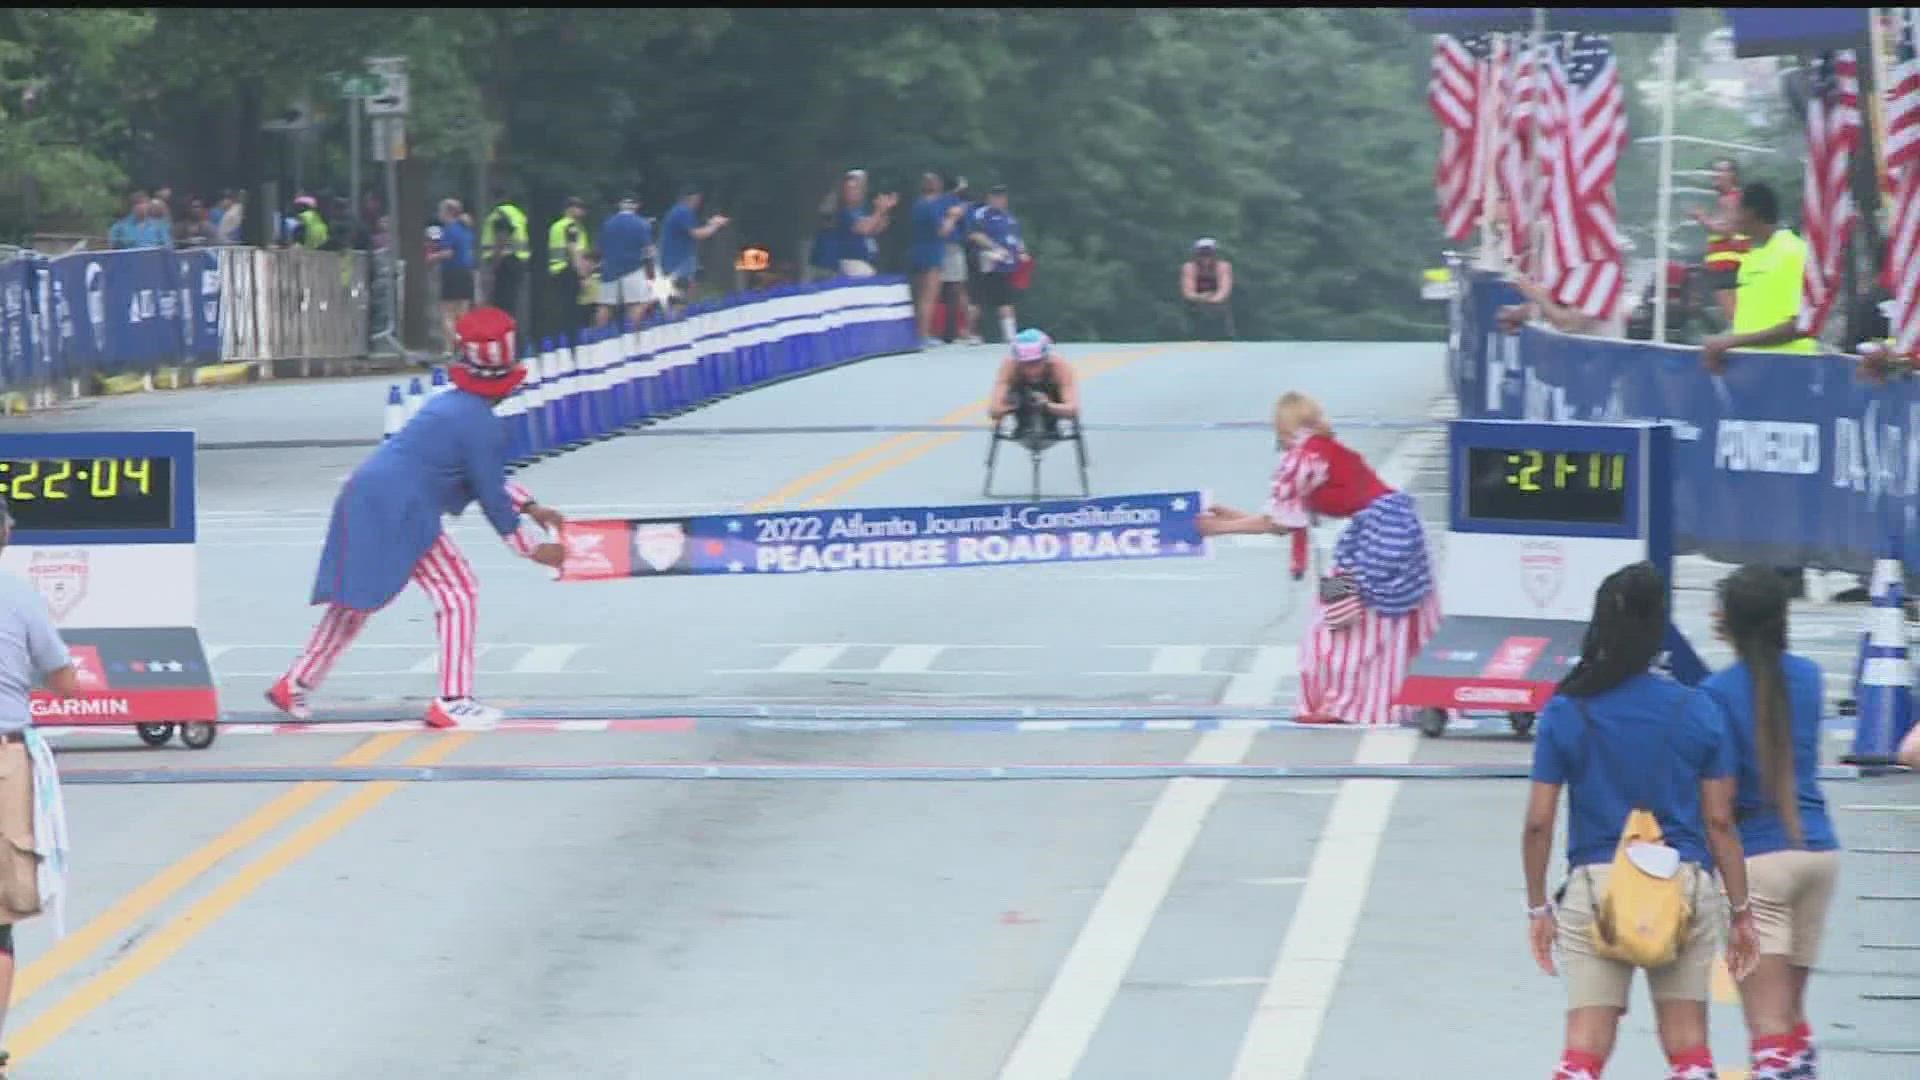 A record was beaten in the women's wheelchair race.